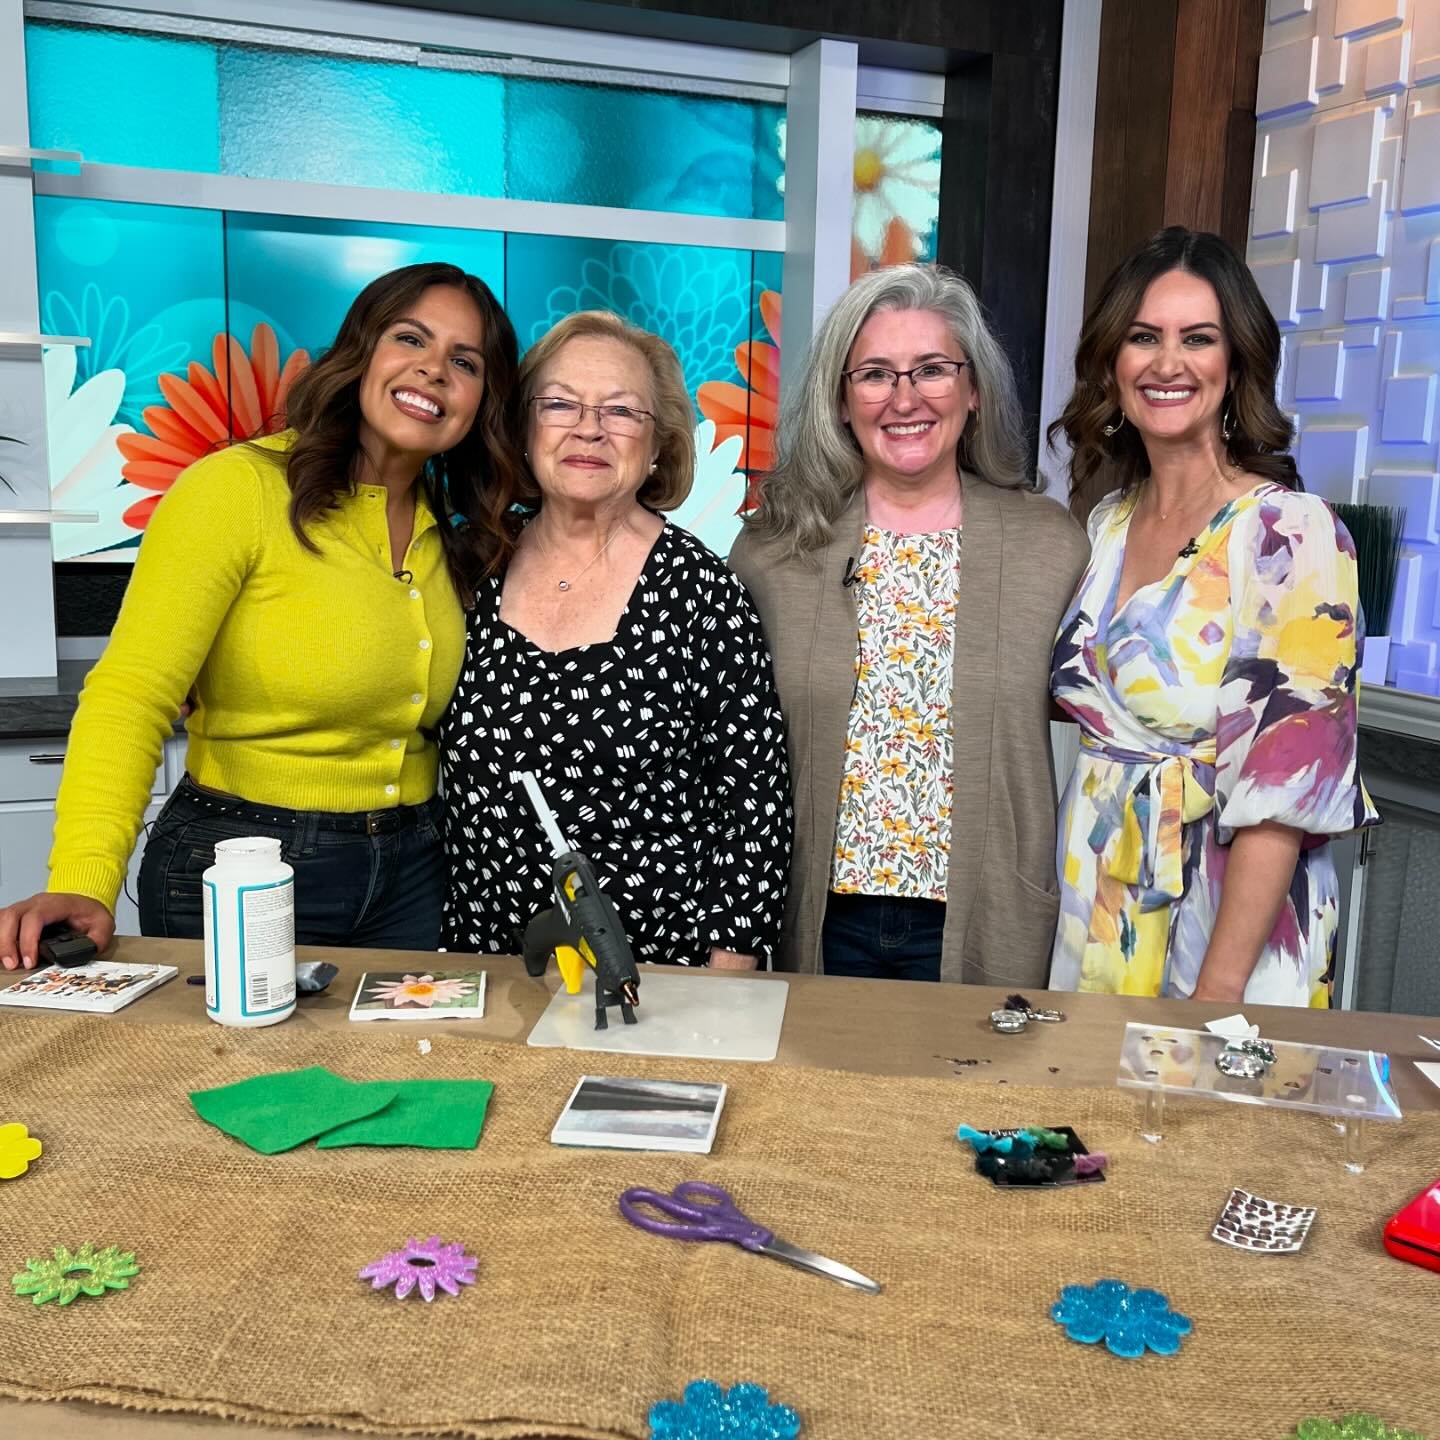 If you are looking for some easy Mother&rsquo;s Day gifts, check out the ones we made today on @houstonlifetv 🌹🌸🌺 It was special treat having my mom join me at the studio. 🥰 @kprc2tessa and @kprc2laurenkelly are always so fun to create with! 🤗

